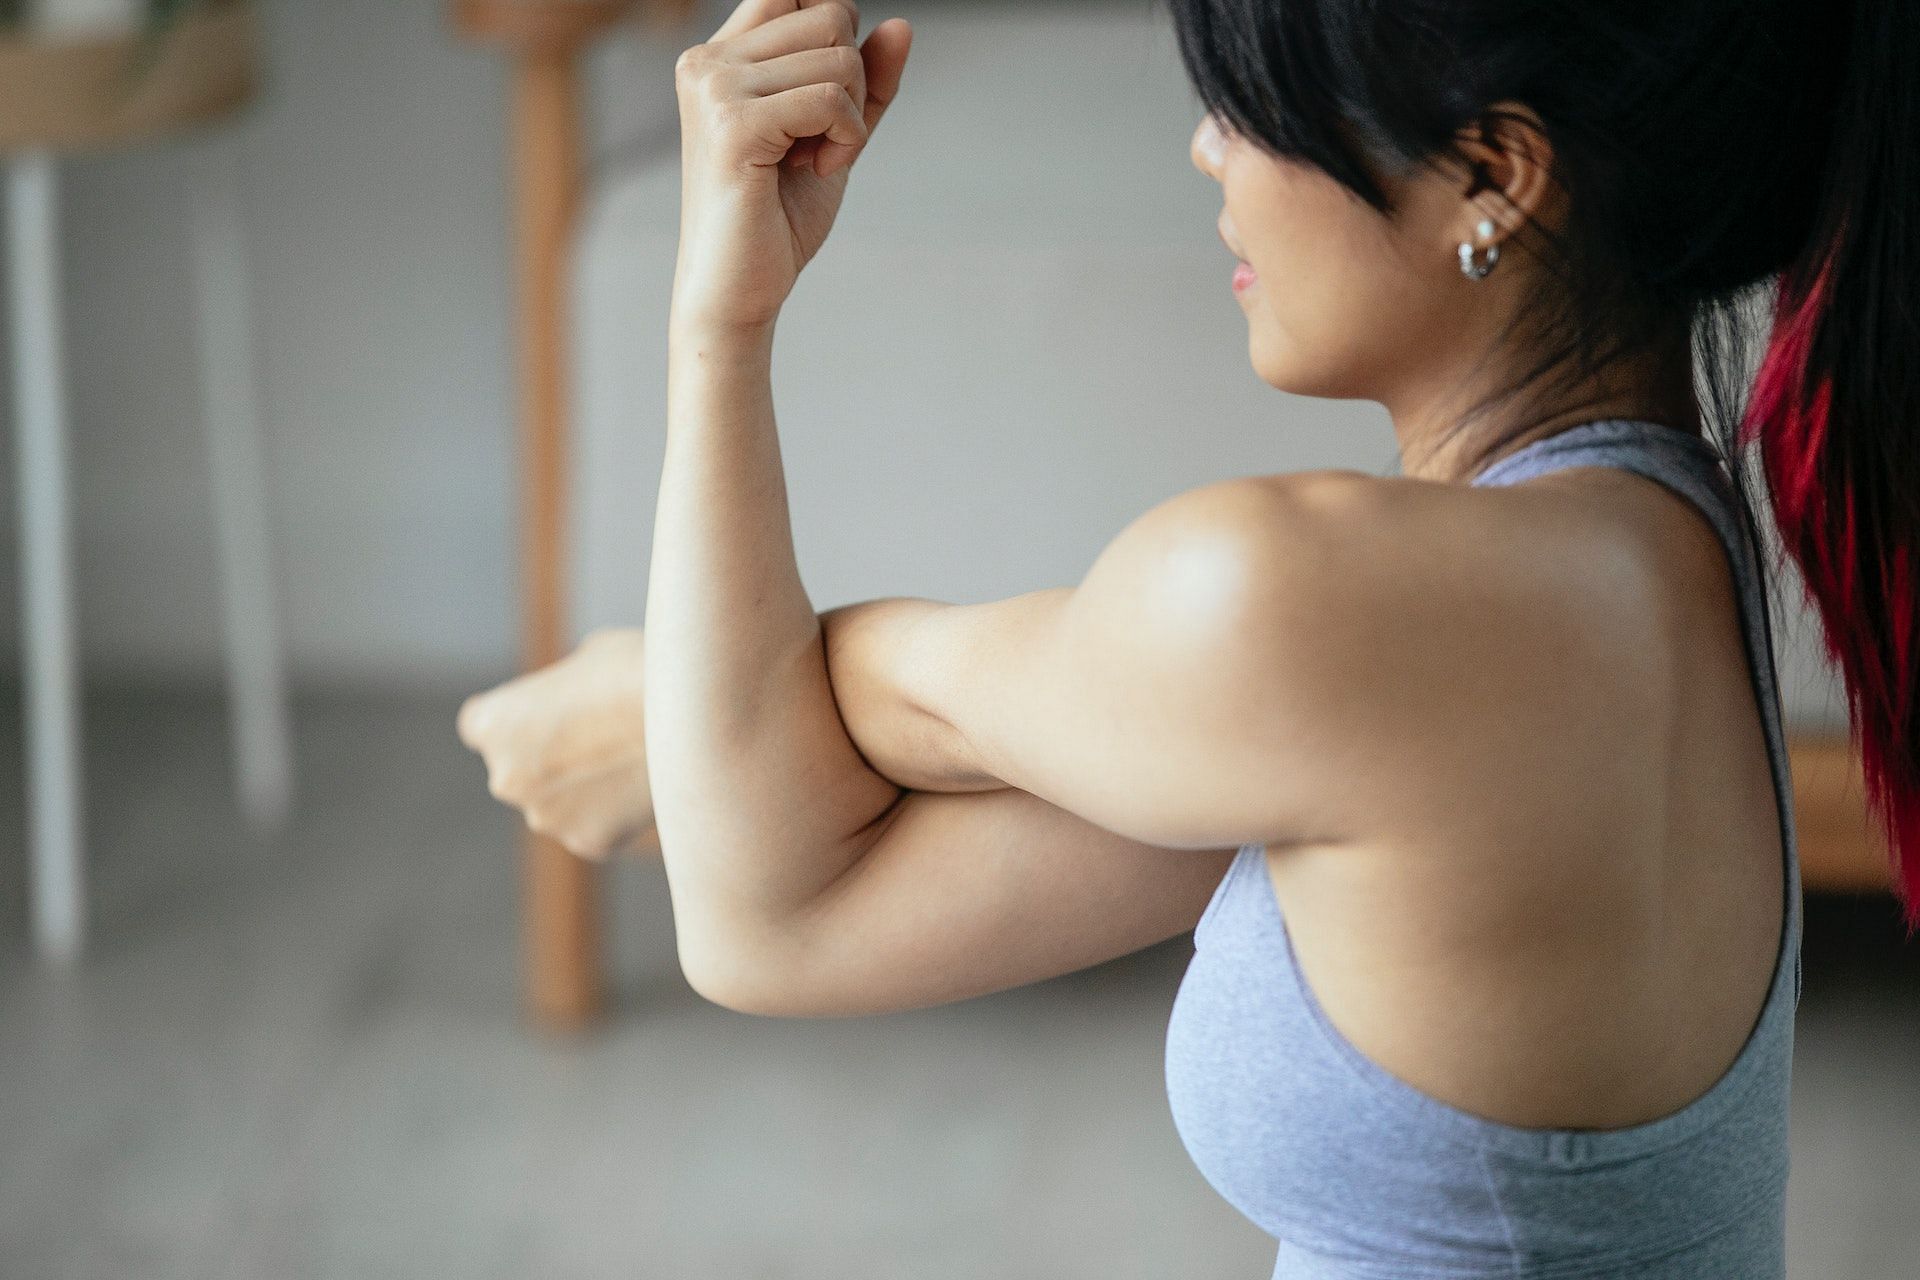 Exercises for rotator cuff injury gently stretch the muscles and promote flexibility. (Photo via Pexels/Miriam Alonso)